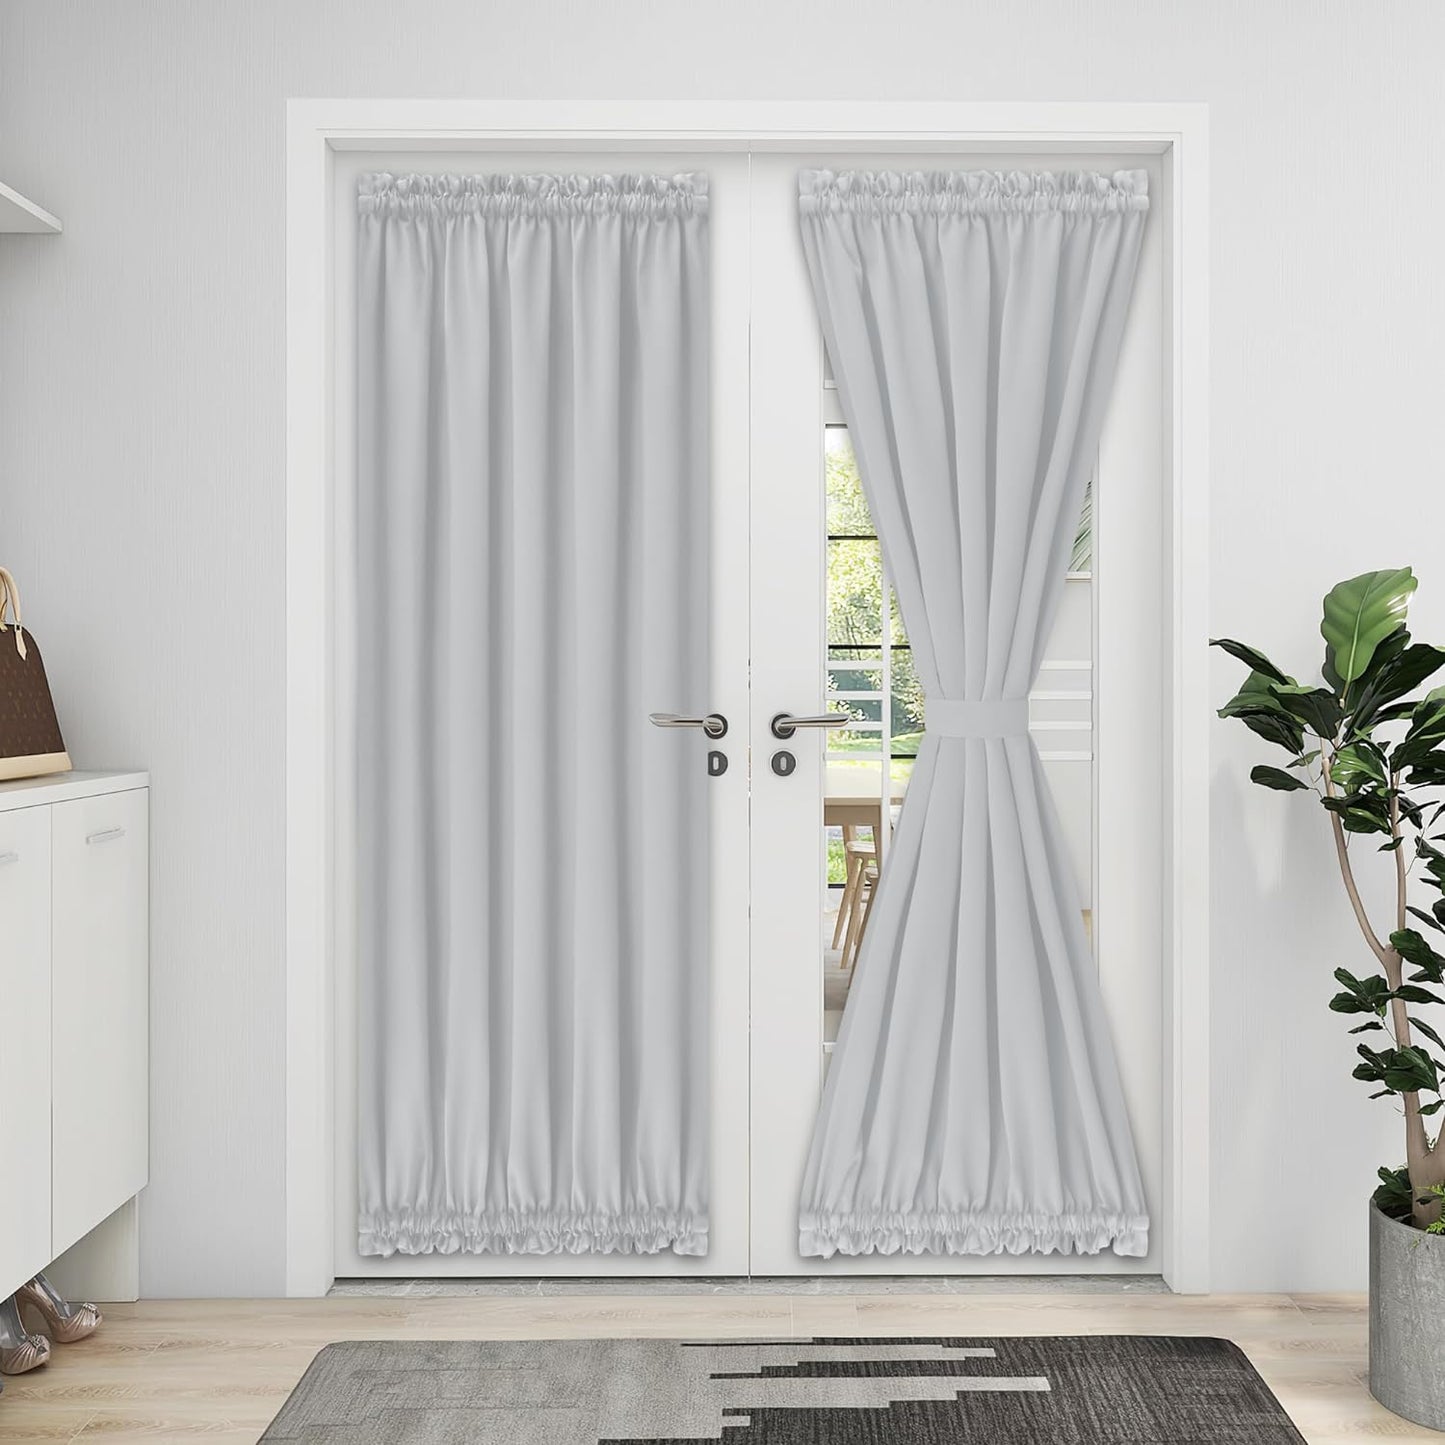 Easy-Going Blackout Door Curtains, Rod Pocket Privacy Light Filtering Sidelight Curtains French Door Curtains with Tieback, 1 Panel, 25X40 Inch, Gray  Easy-Going Greyish White W52 X L72 Inch 